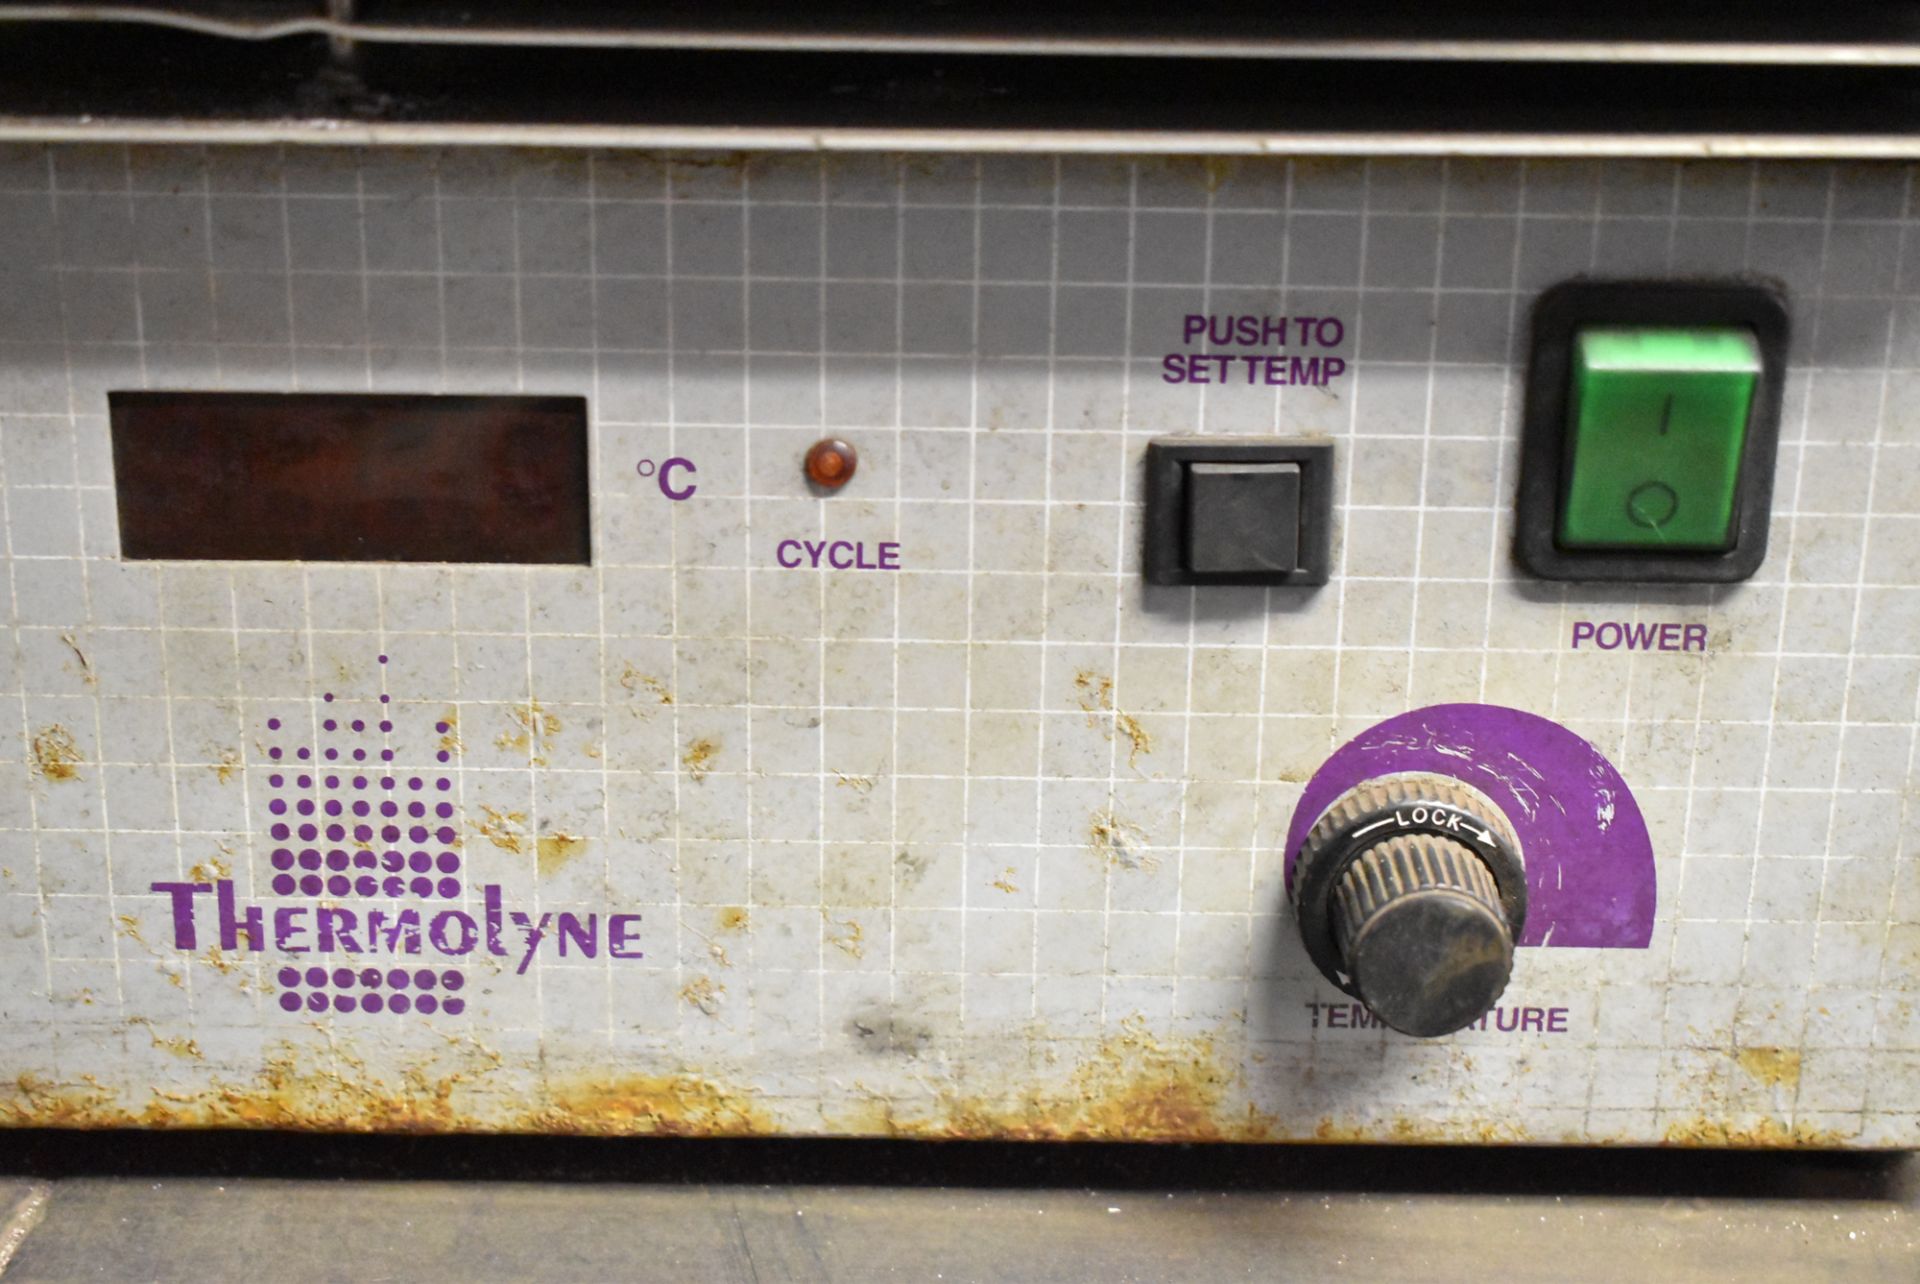 THERMOLINE BENCH TYPE ELECTRIC LAB OVEN WITH DIGITAL MICROPROCESSOR CONTROL, S/N N/A - Image 2 of 3